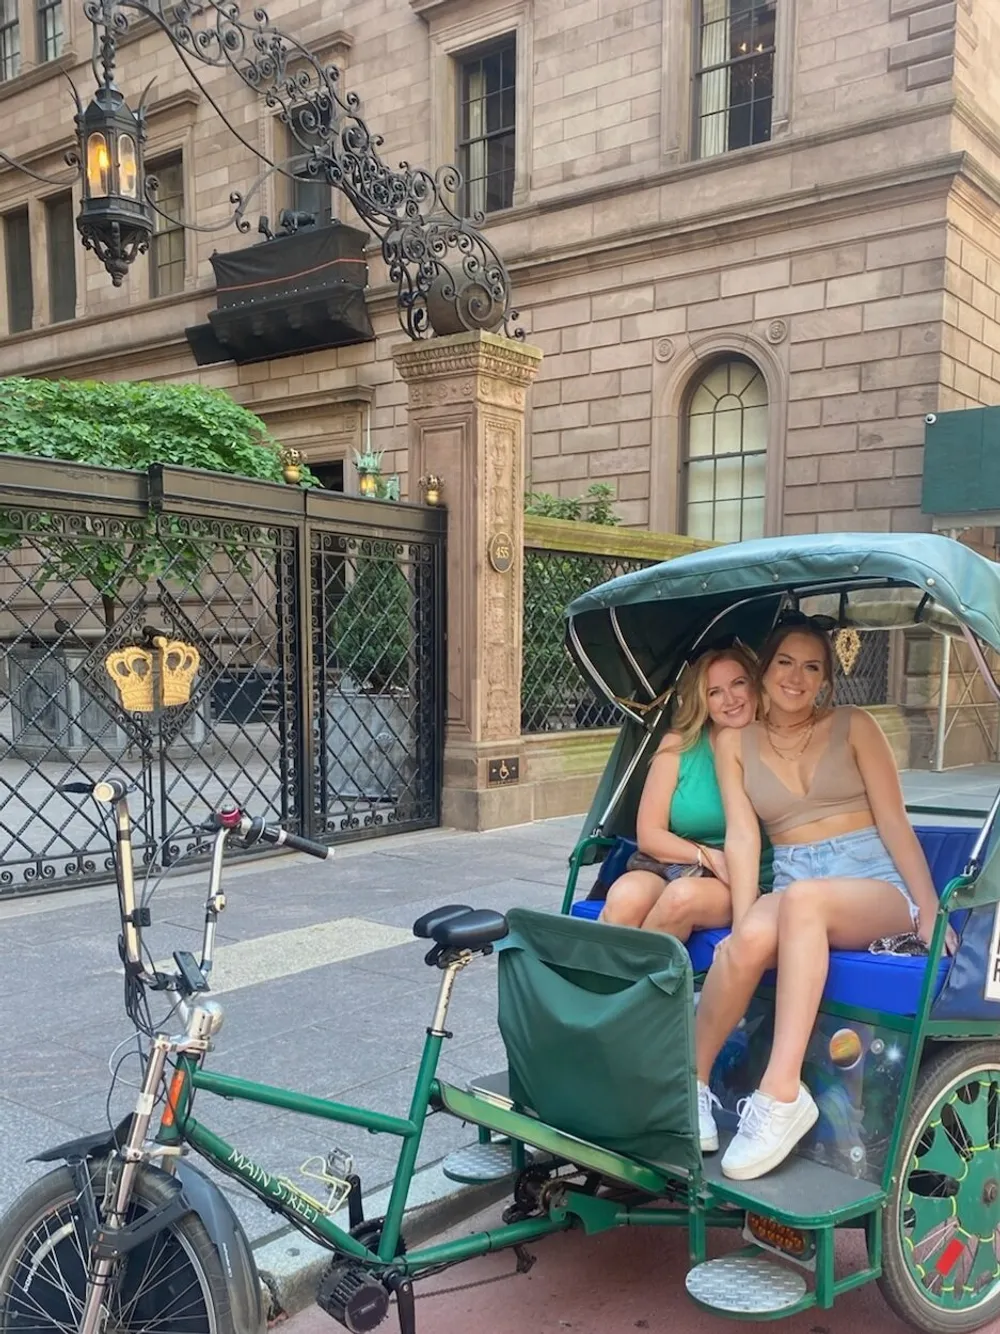 Two people are smiling while seated in a green pedicab parked in front of an elegant building with ironwork detailing